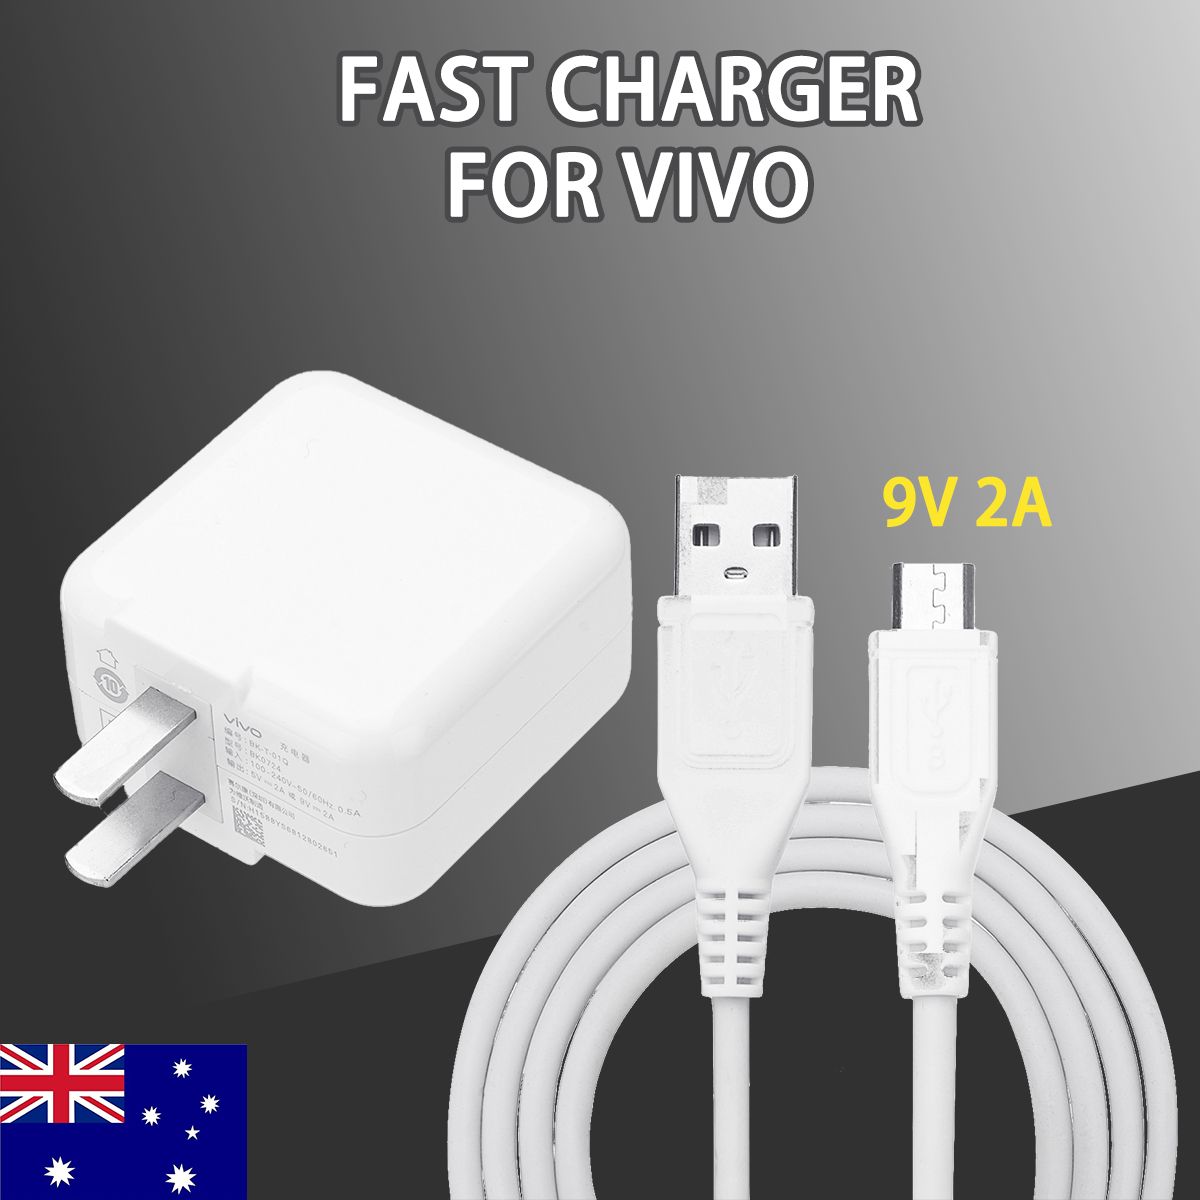 Original-Vivo-Dual-engine-Flash-USB-Charger-AdapterampUSB-Cable-For-x9-x7-x6-X20-X21-1439445